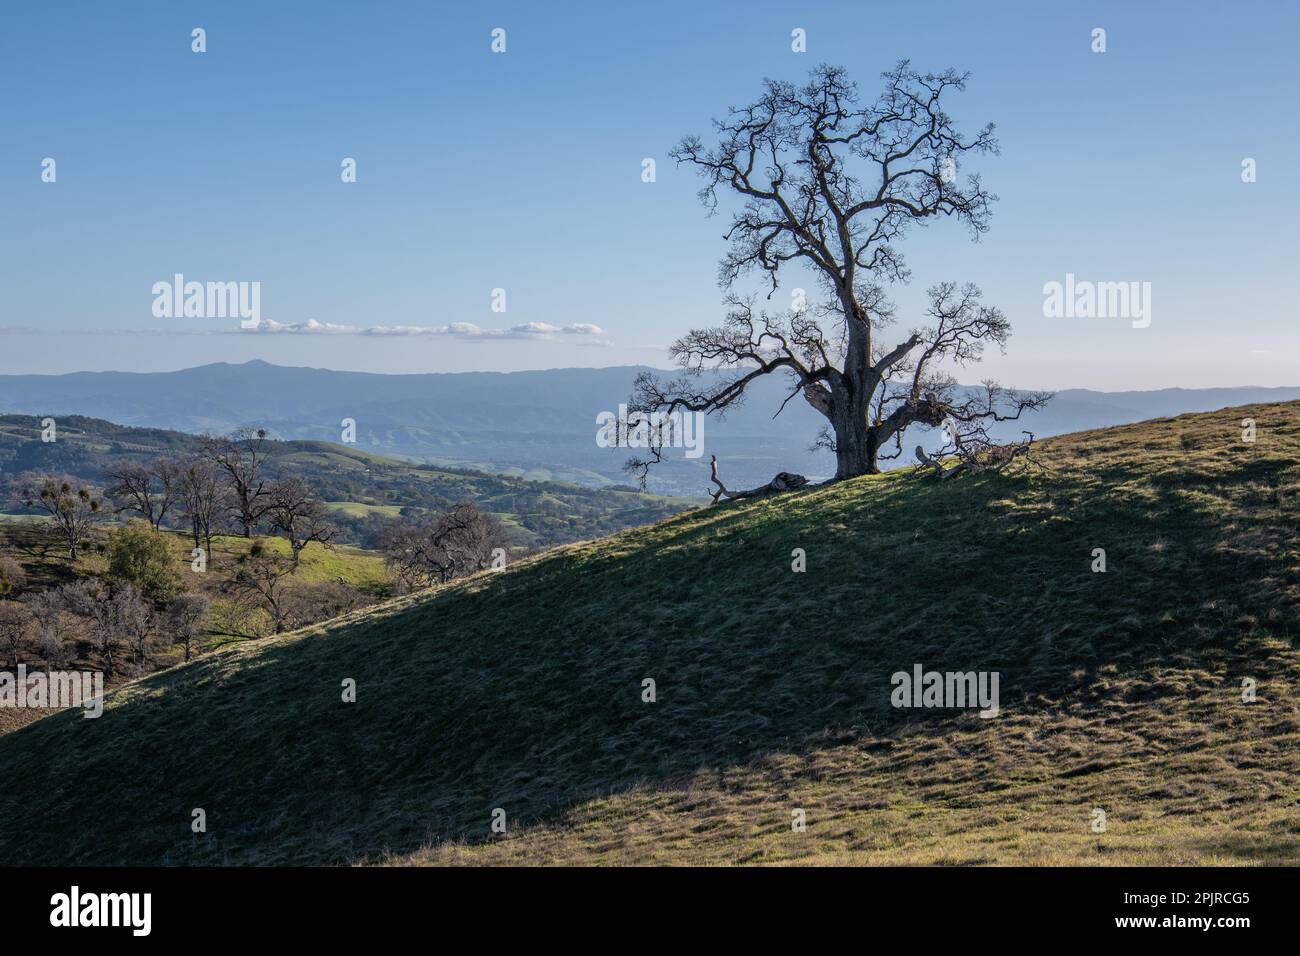 A lone oak tree on a hillside in Santa Clara county, California. The tree is large and leafless with winding gnarled branches. Stock Photo